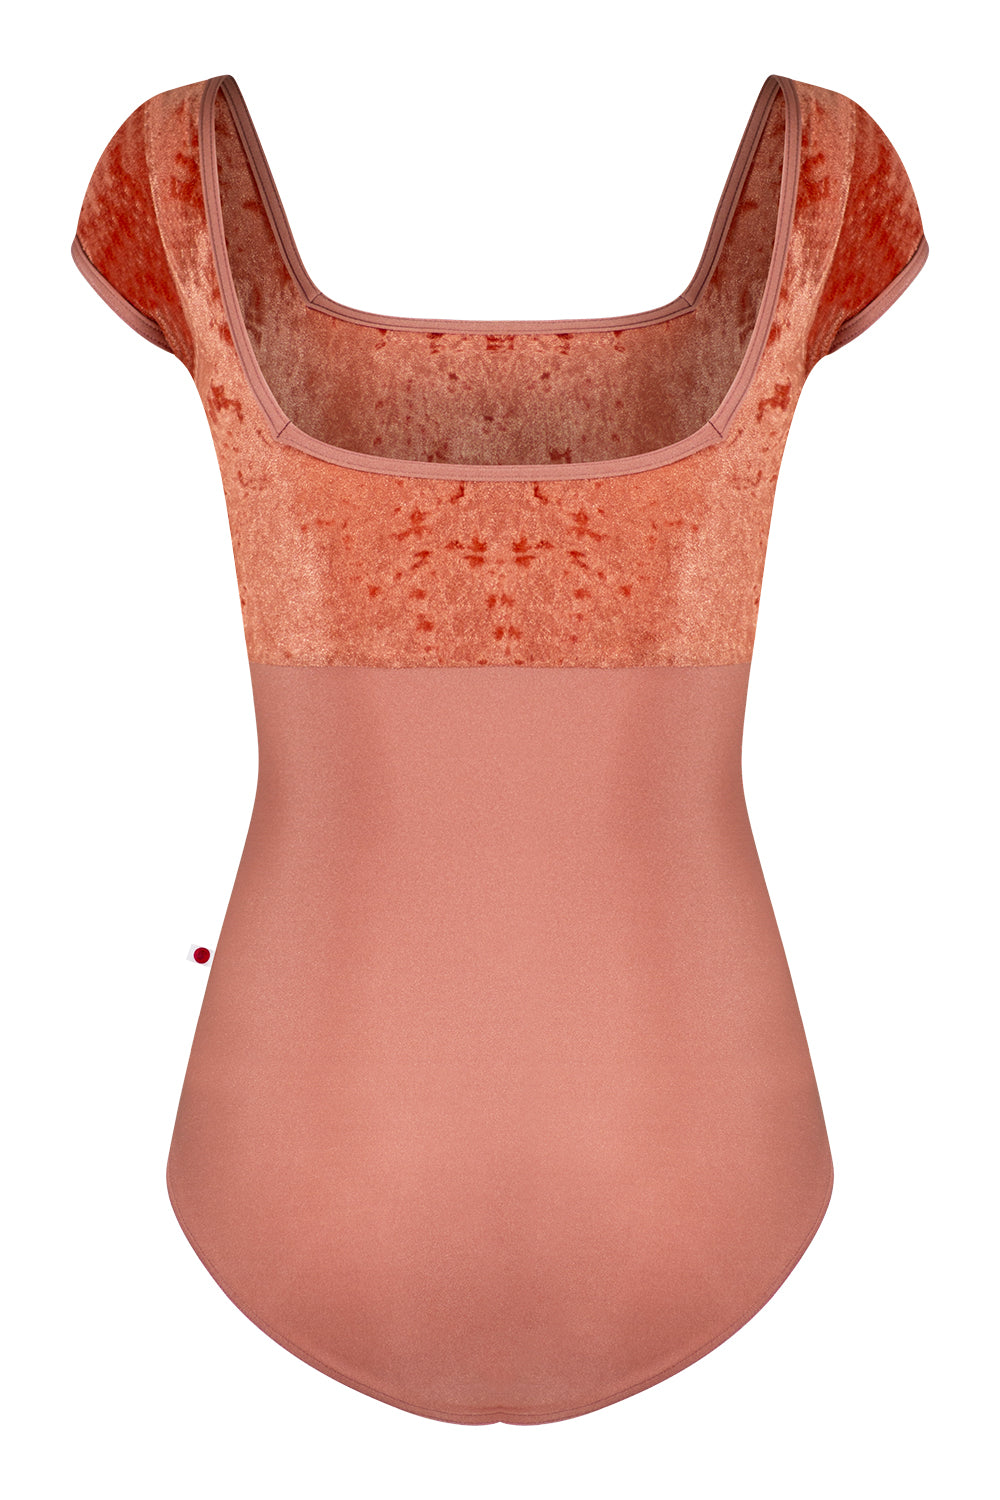 Marieke Duo leotard in N-Rosewood body color with CV-Amaretto top color & Cap sleeves and N-Rosewood trim color